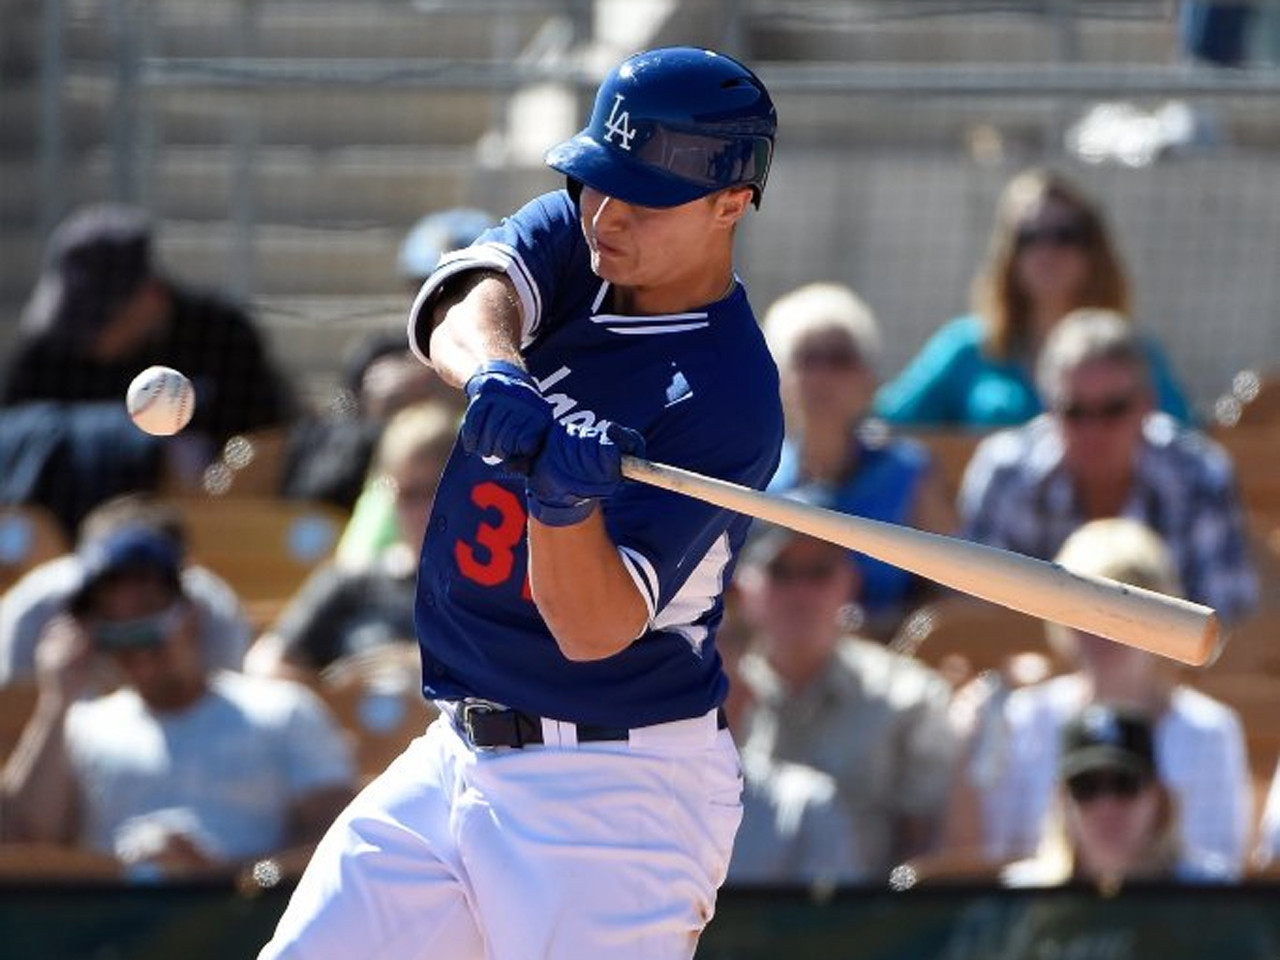 Joc Pederson is center of attention for Dodgers this spring - LA Times1280 x 960